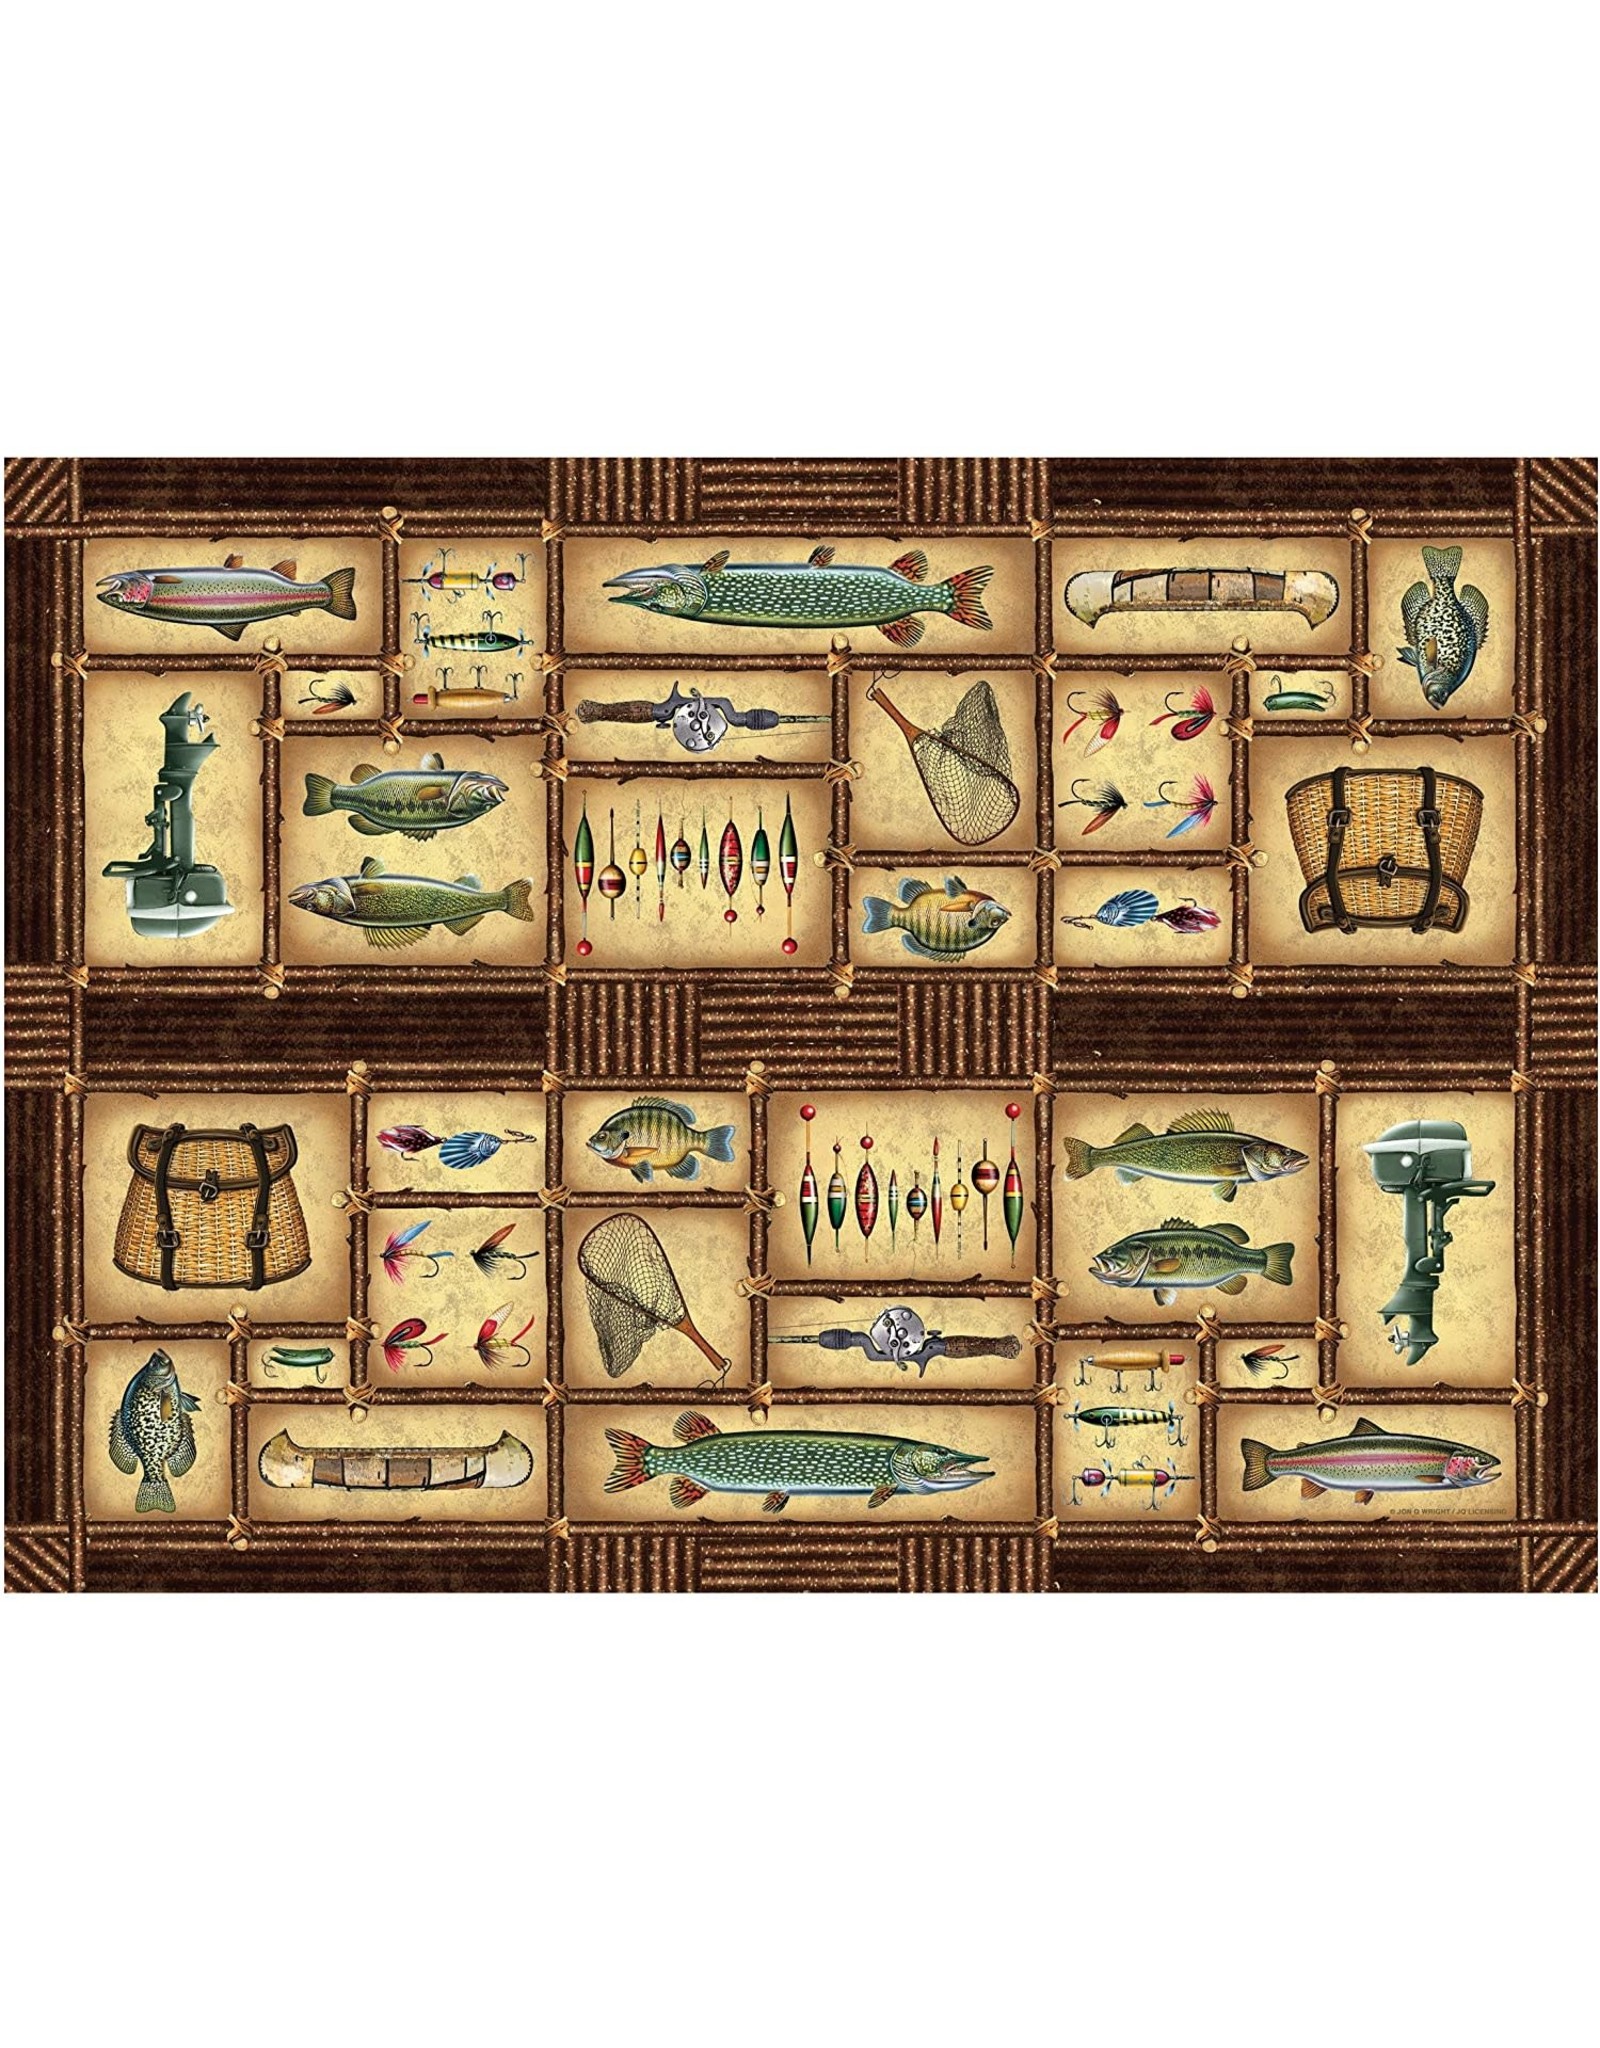 Rivers Edge Products Door Mat Woven 52in x 37in - Fishing